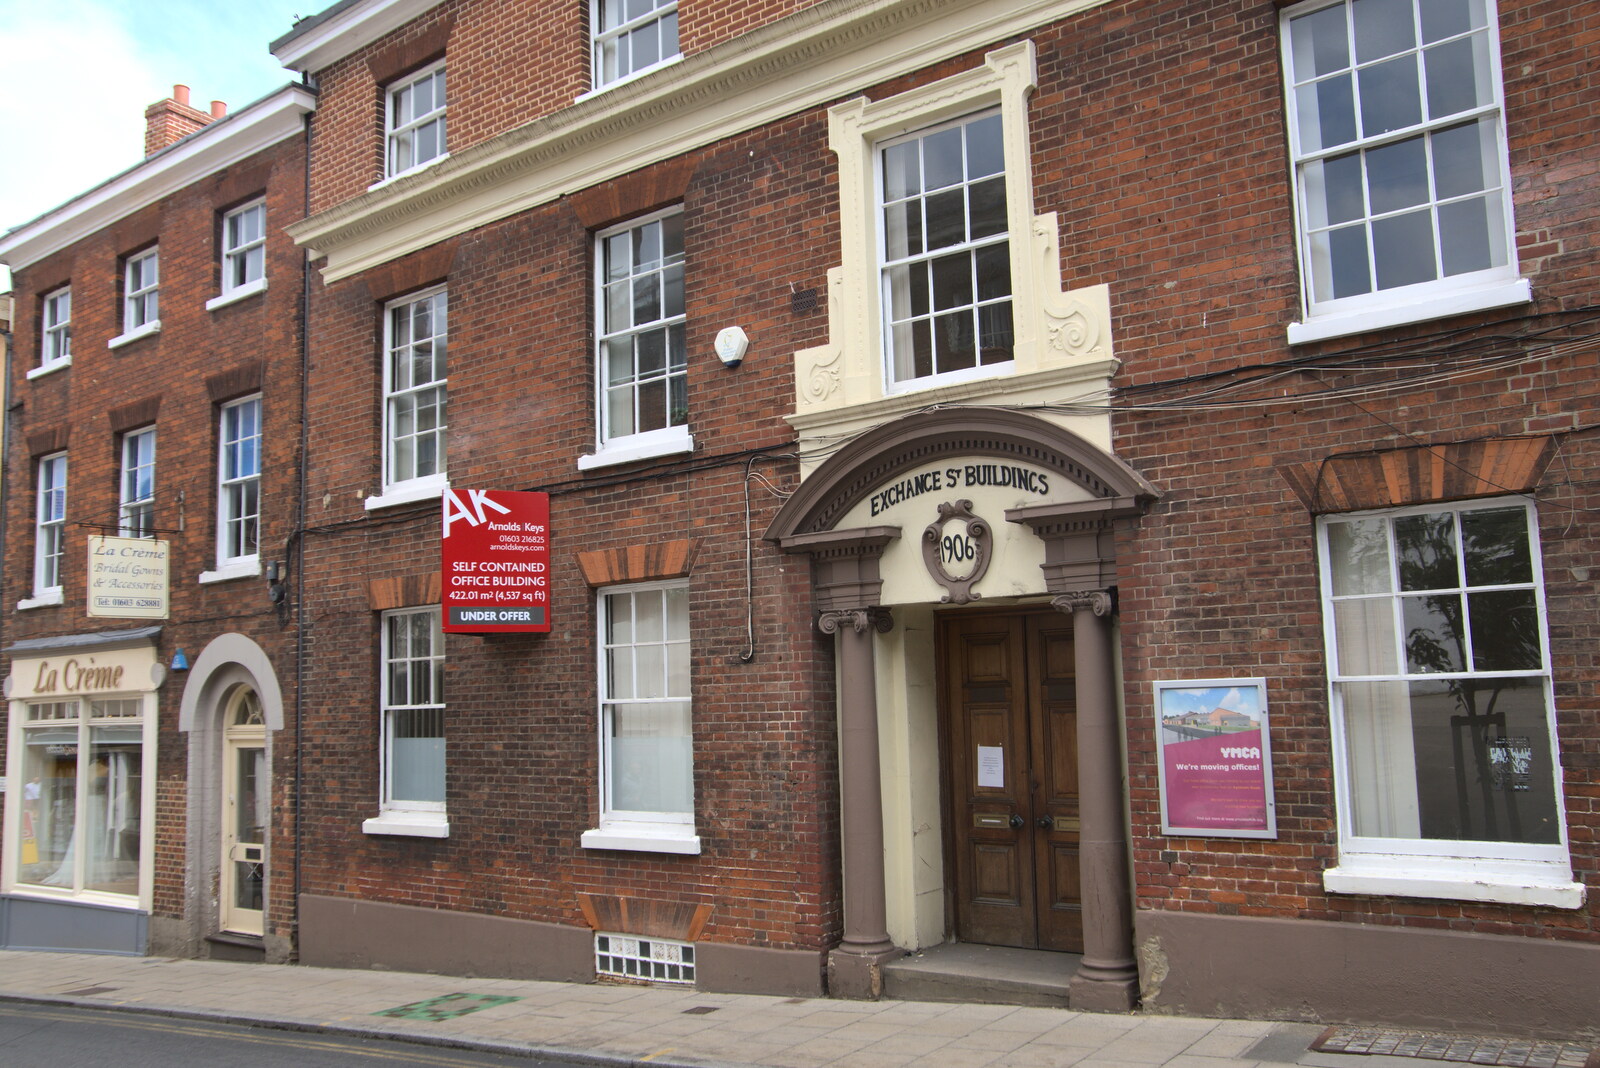 The Exchange Street Building from 1906 from The BSCC at Earl Soham and at Colin and Jill's, Eye, Suffolk - 26th June 2021